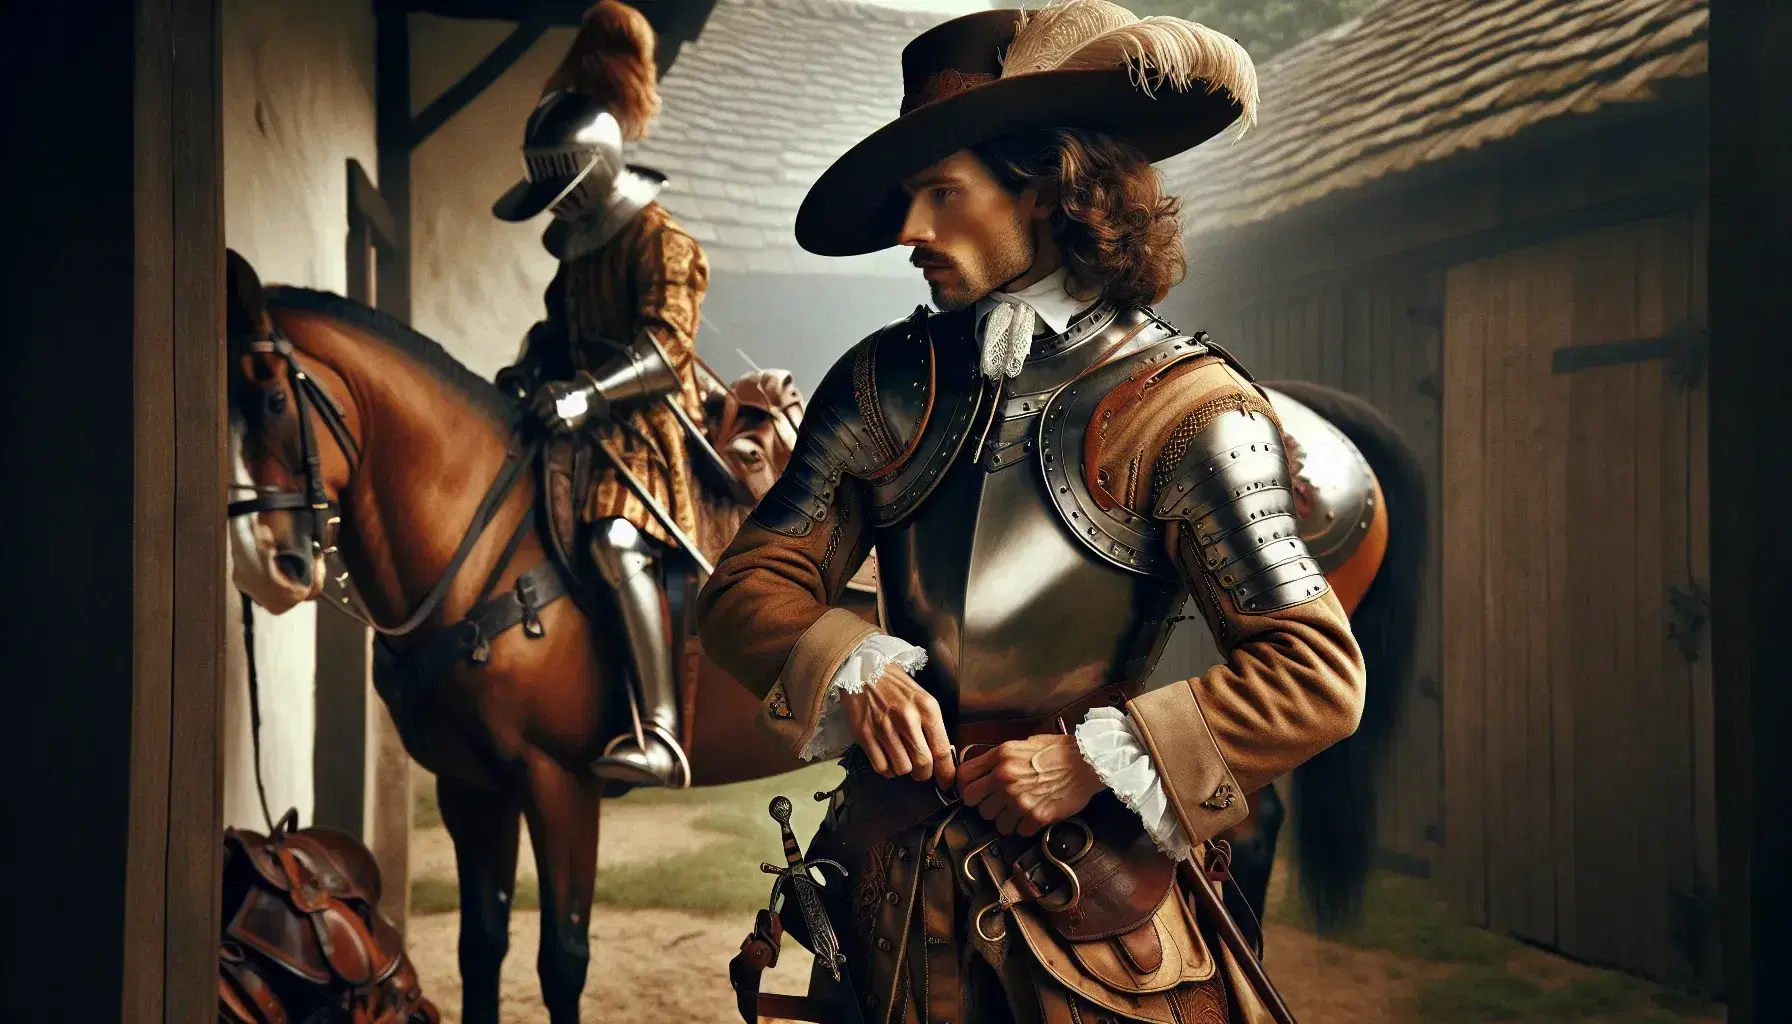 17th-century English cavalier in period attire securing a steel breastplate, holding a helmet, with a chestnut horse by a manor at dawn.